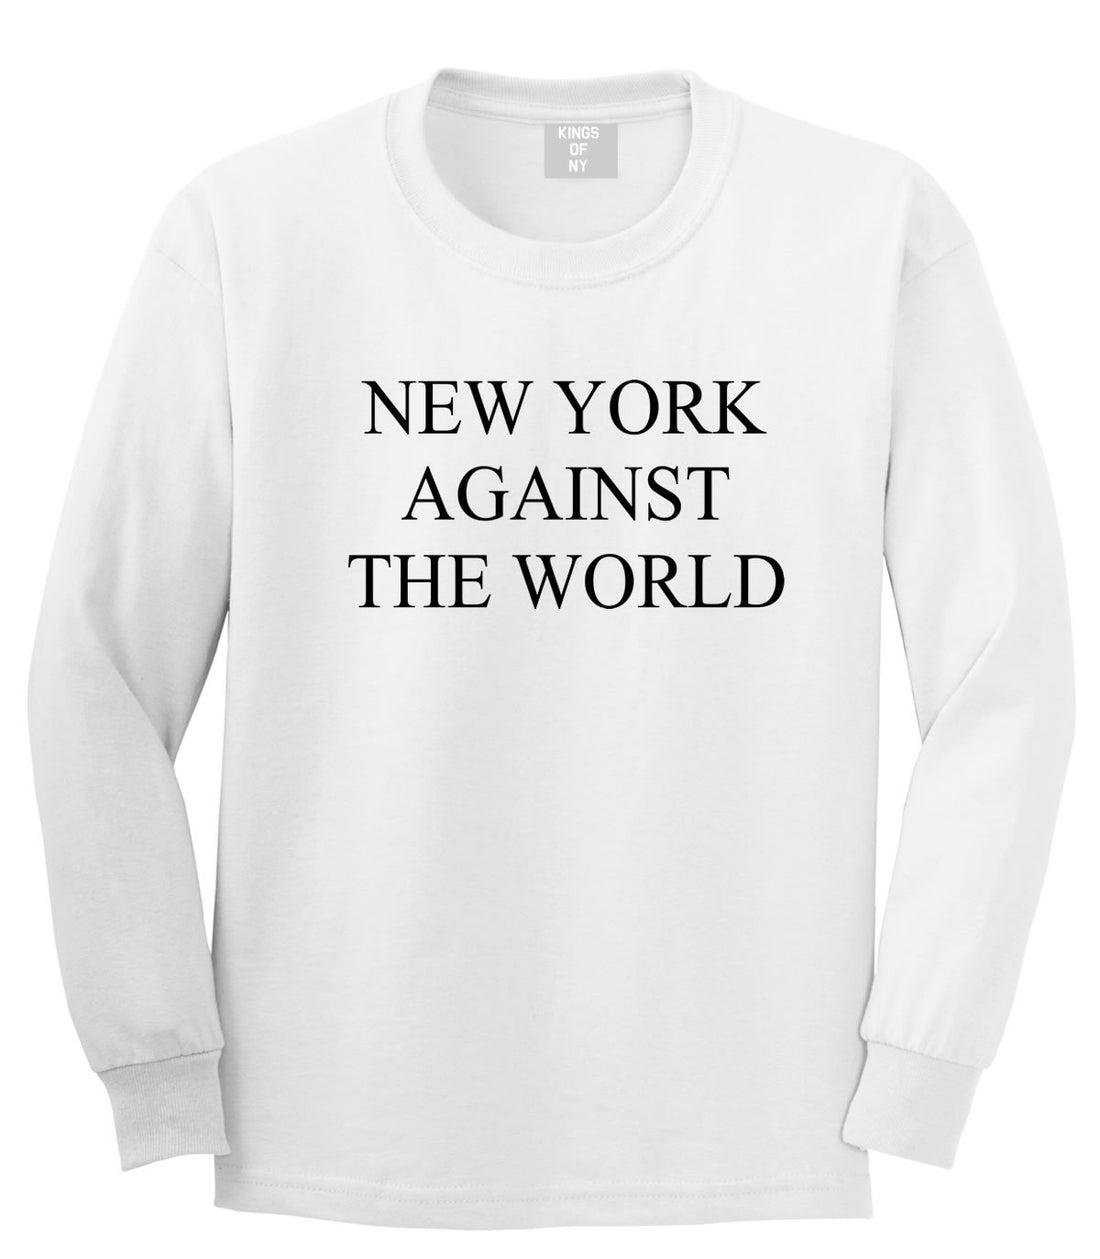 New York Against The World Long Sleeve T-Shirt in White by Kings Of NY